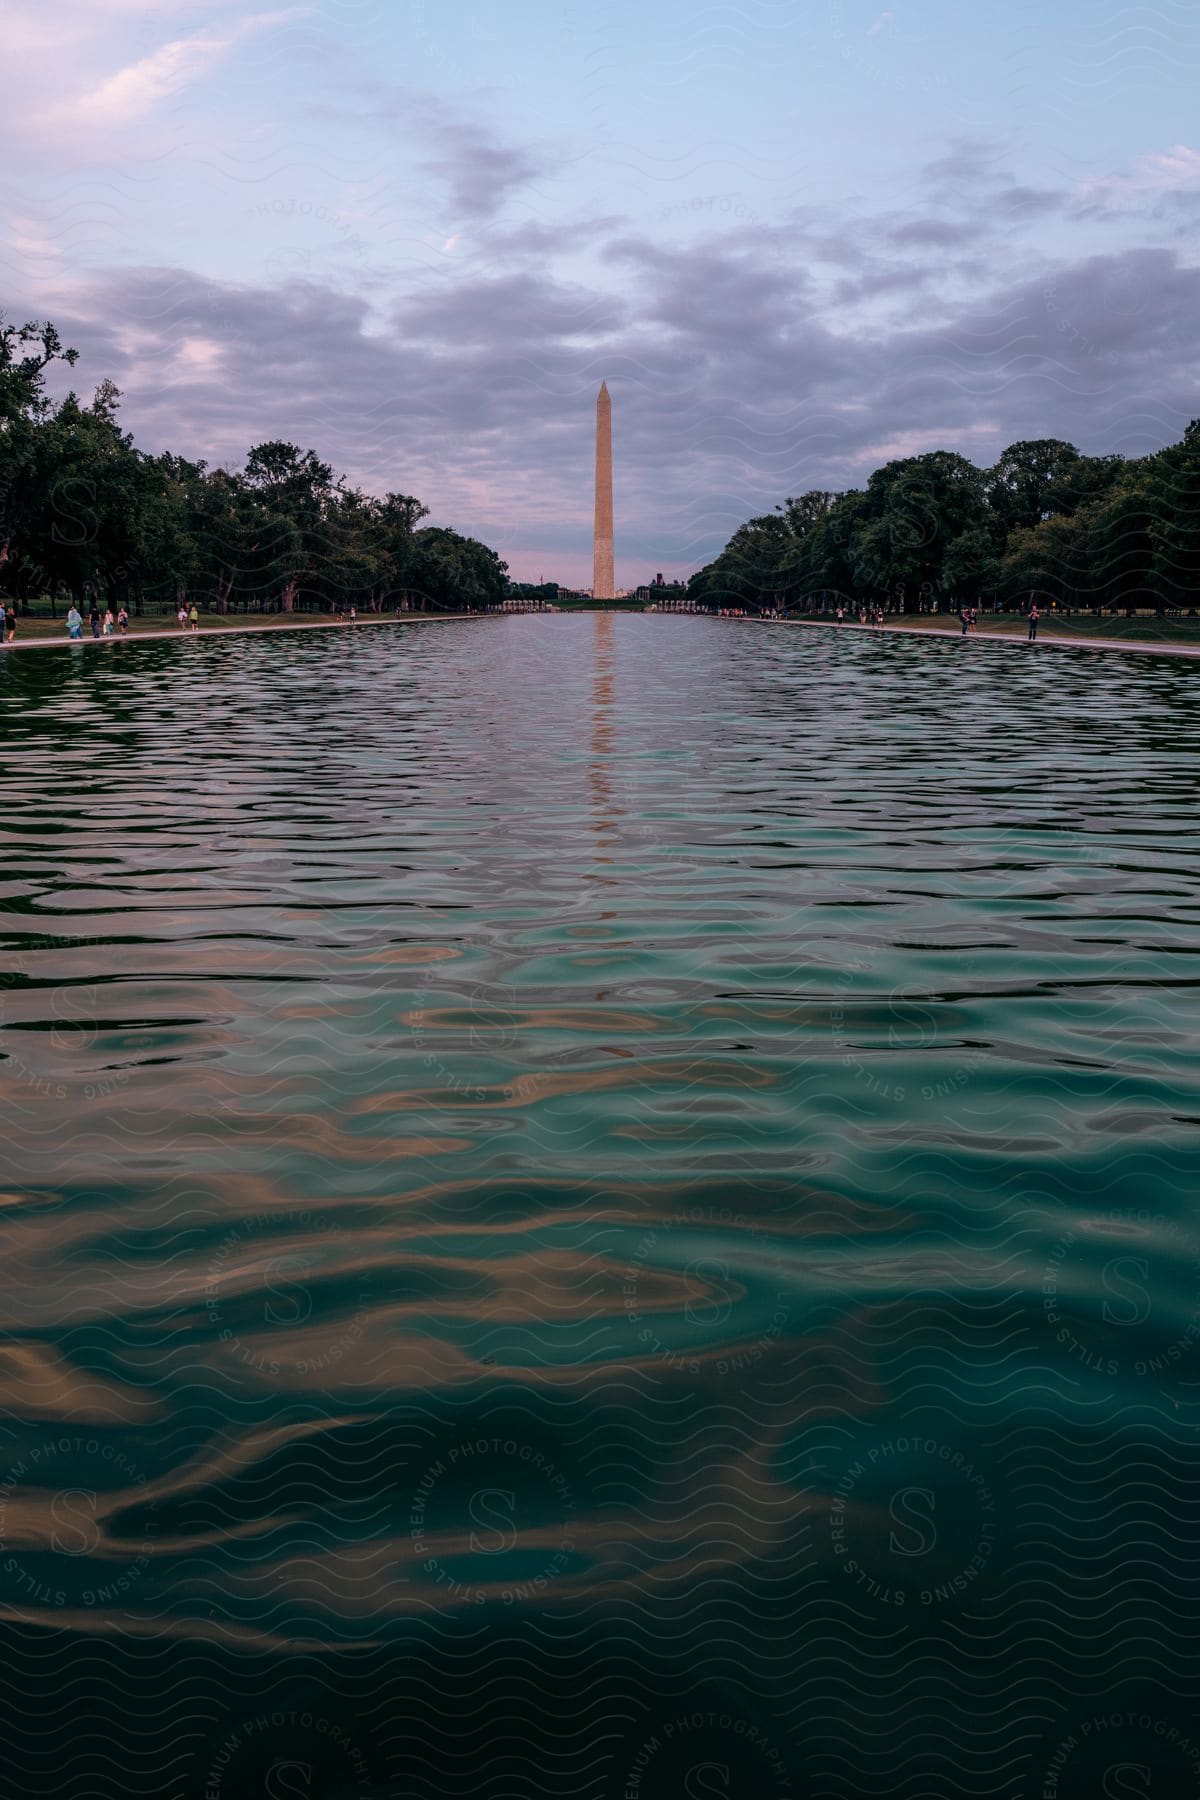 The washington monument in front of the lincoln memorial reflecting pool at evening